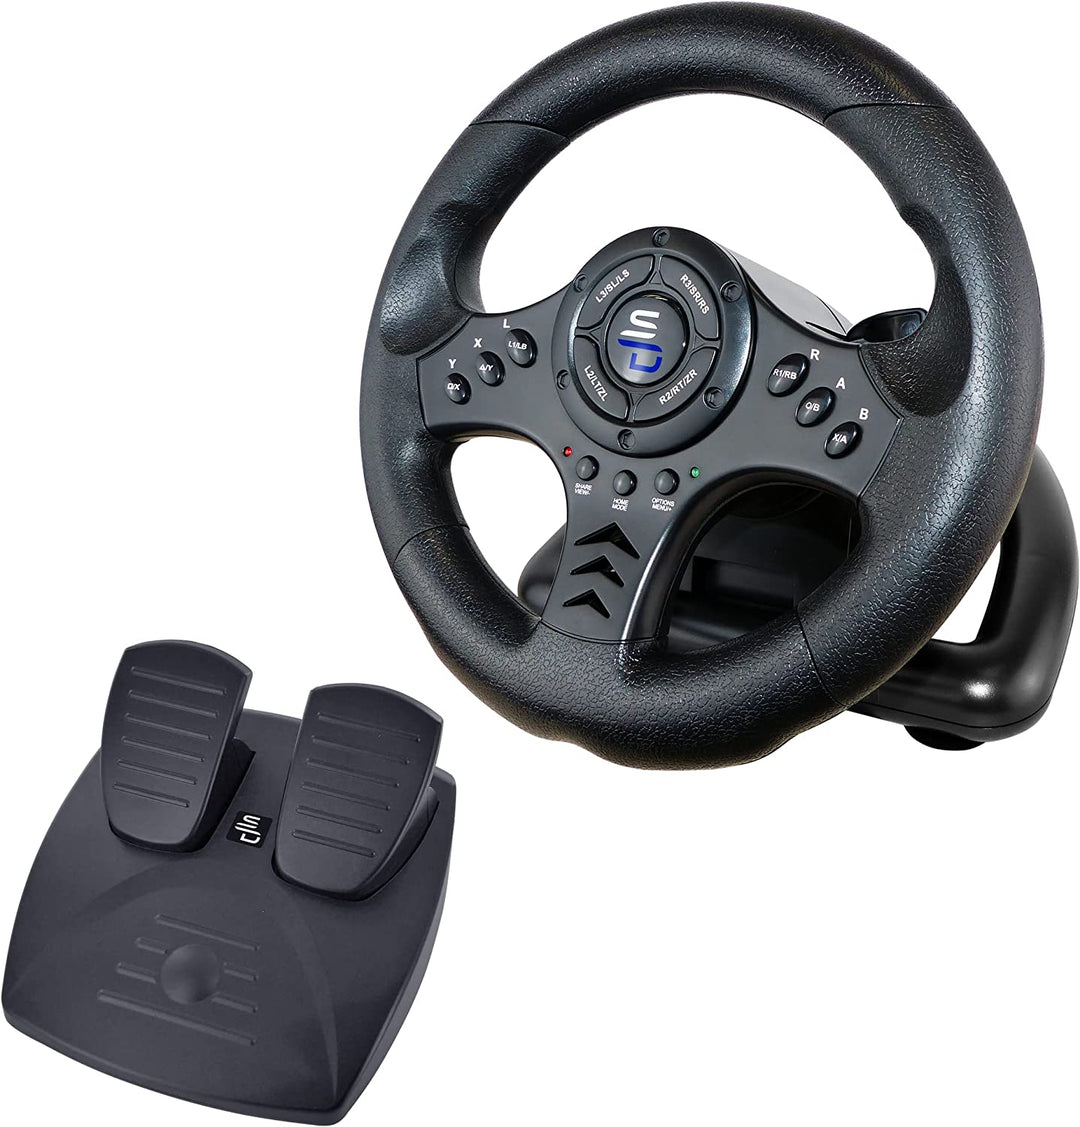 Superdrive - SV450 Racing steering wheel with pedal and paddle shifters for Xbox